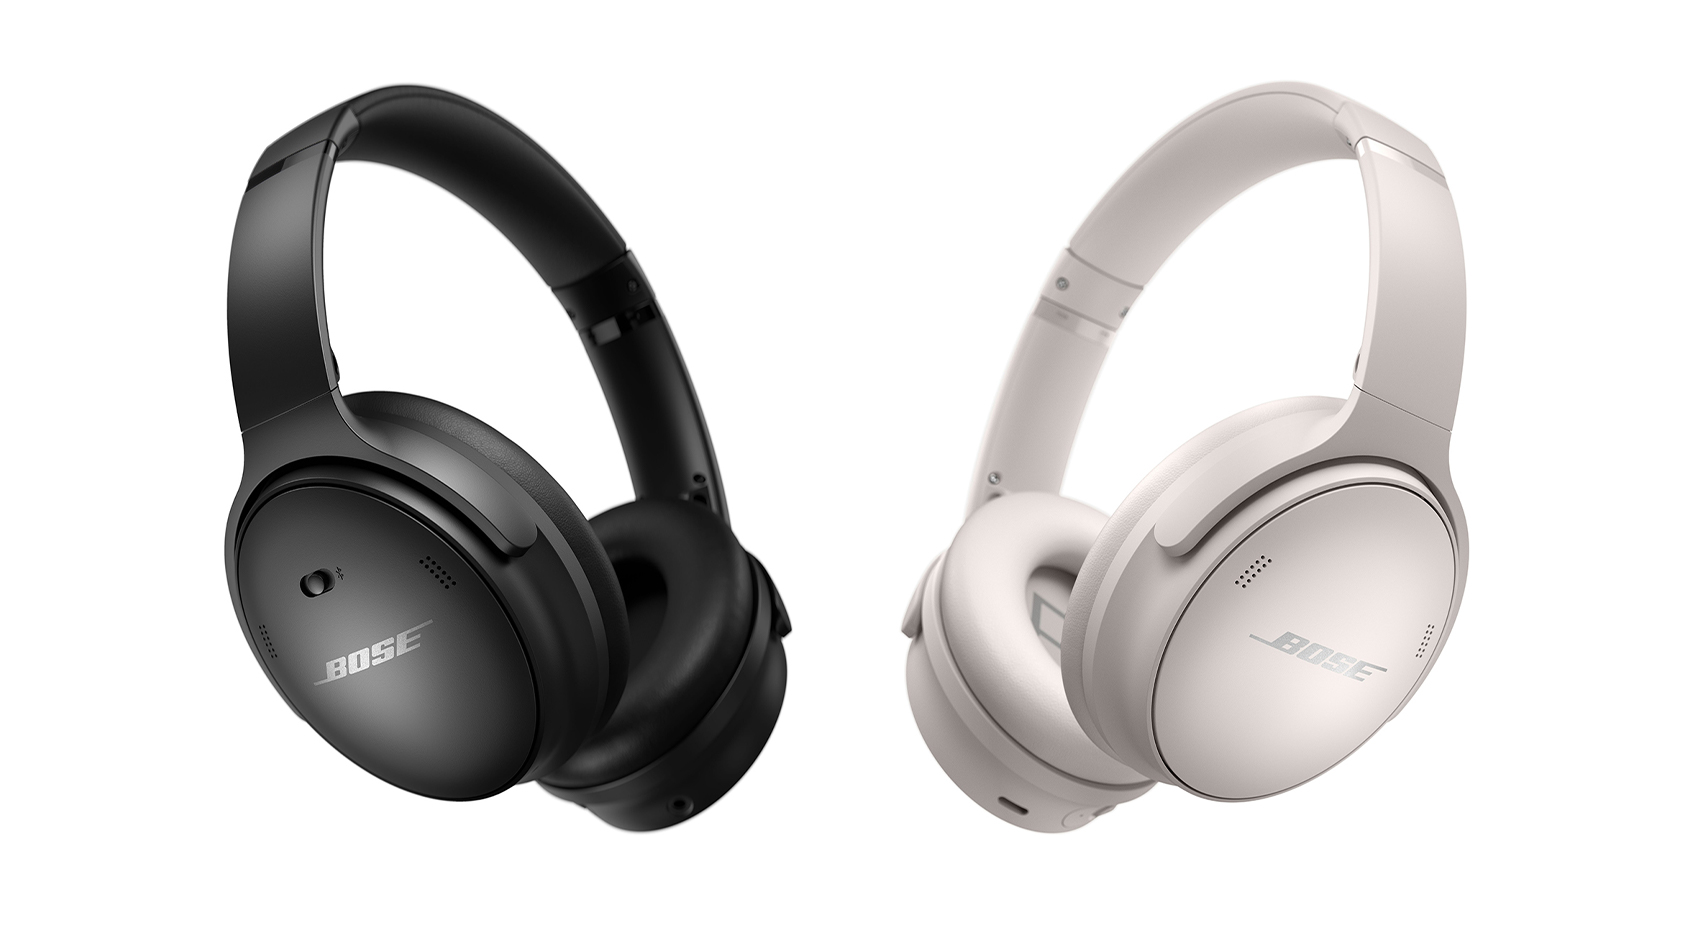 The bose quietcomfort 45 noise-cancelling headphones in black and white.